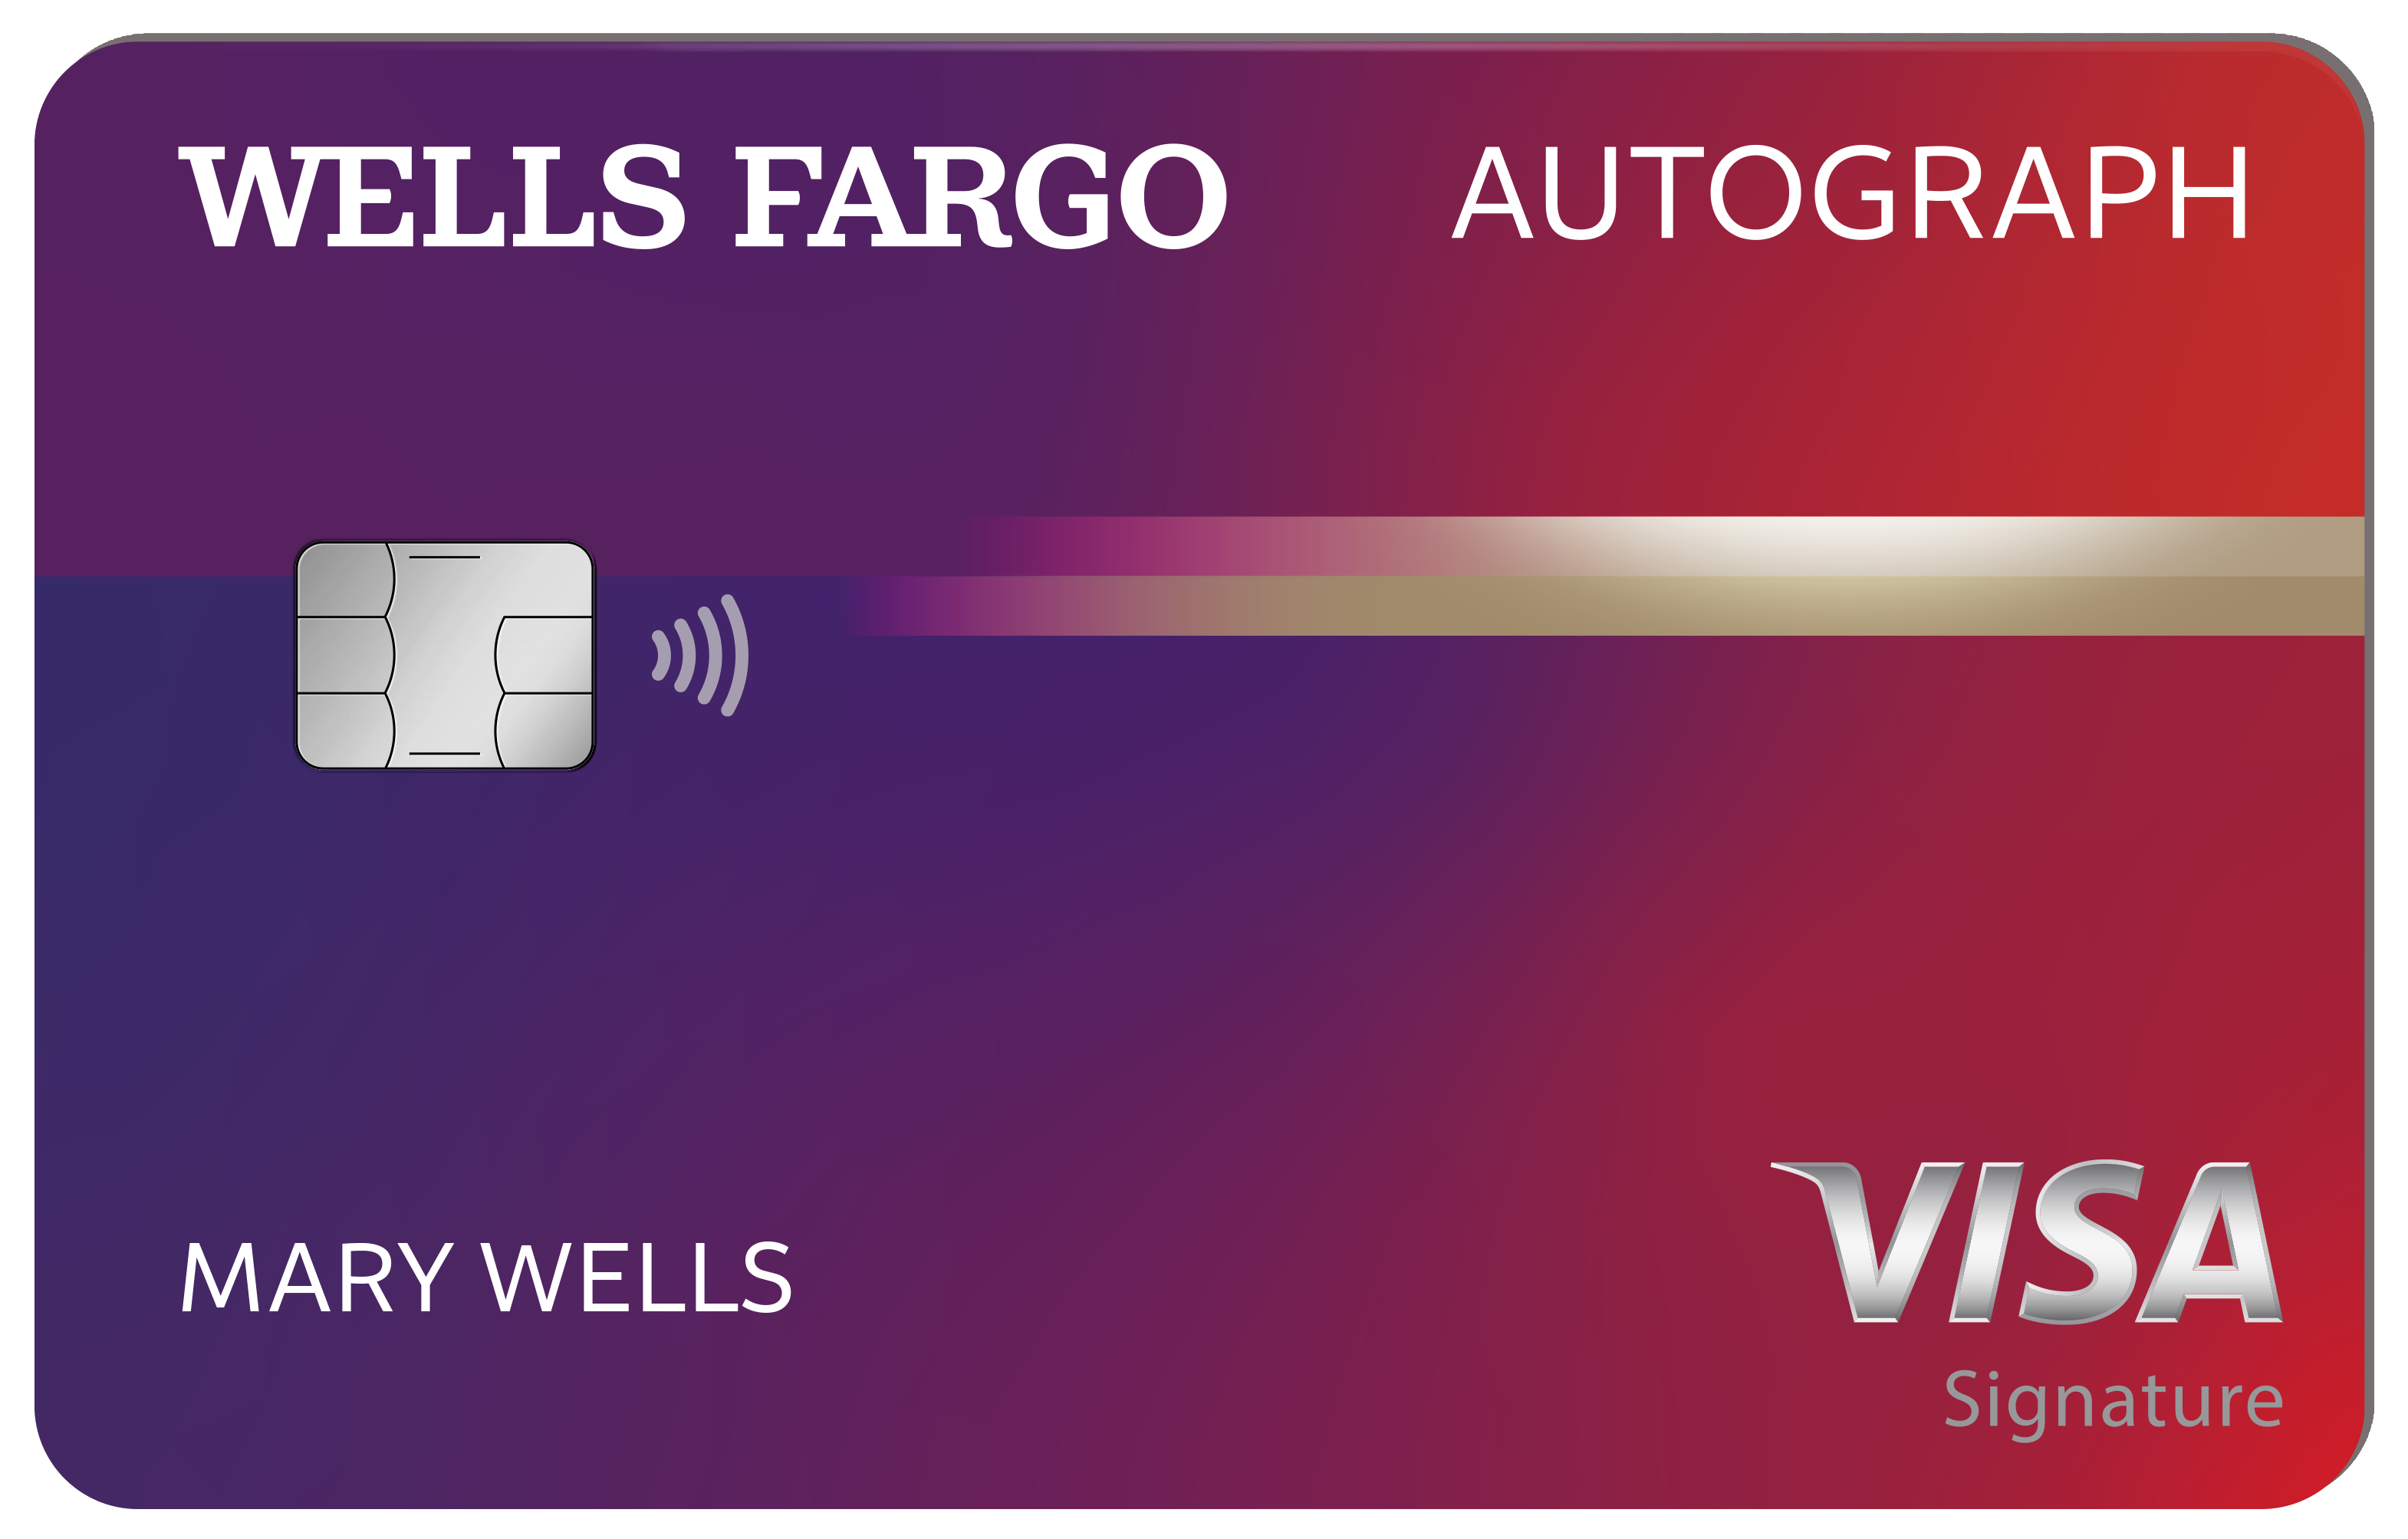 Wells Fargo Autograph℠ Card: Earn 20,000 Bonus Points When You Spend $1,000 in First 3 Months